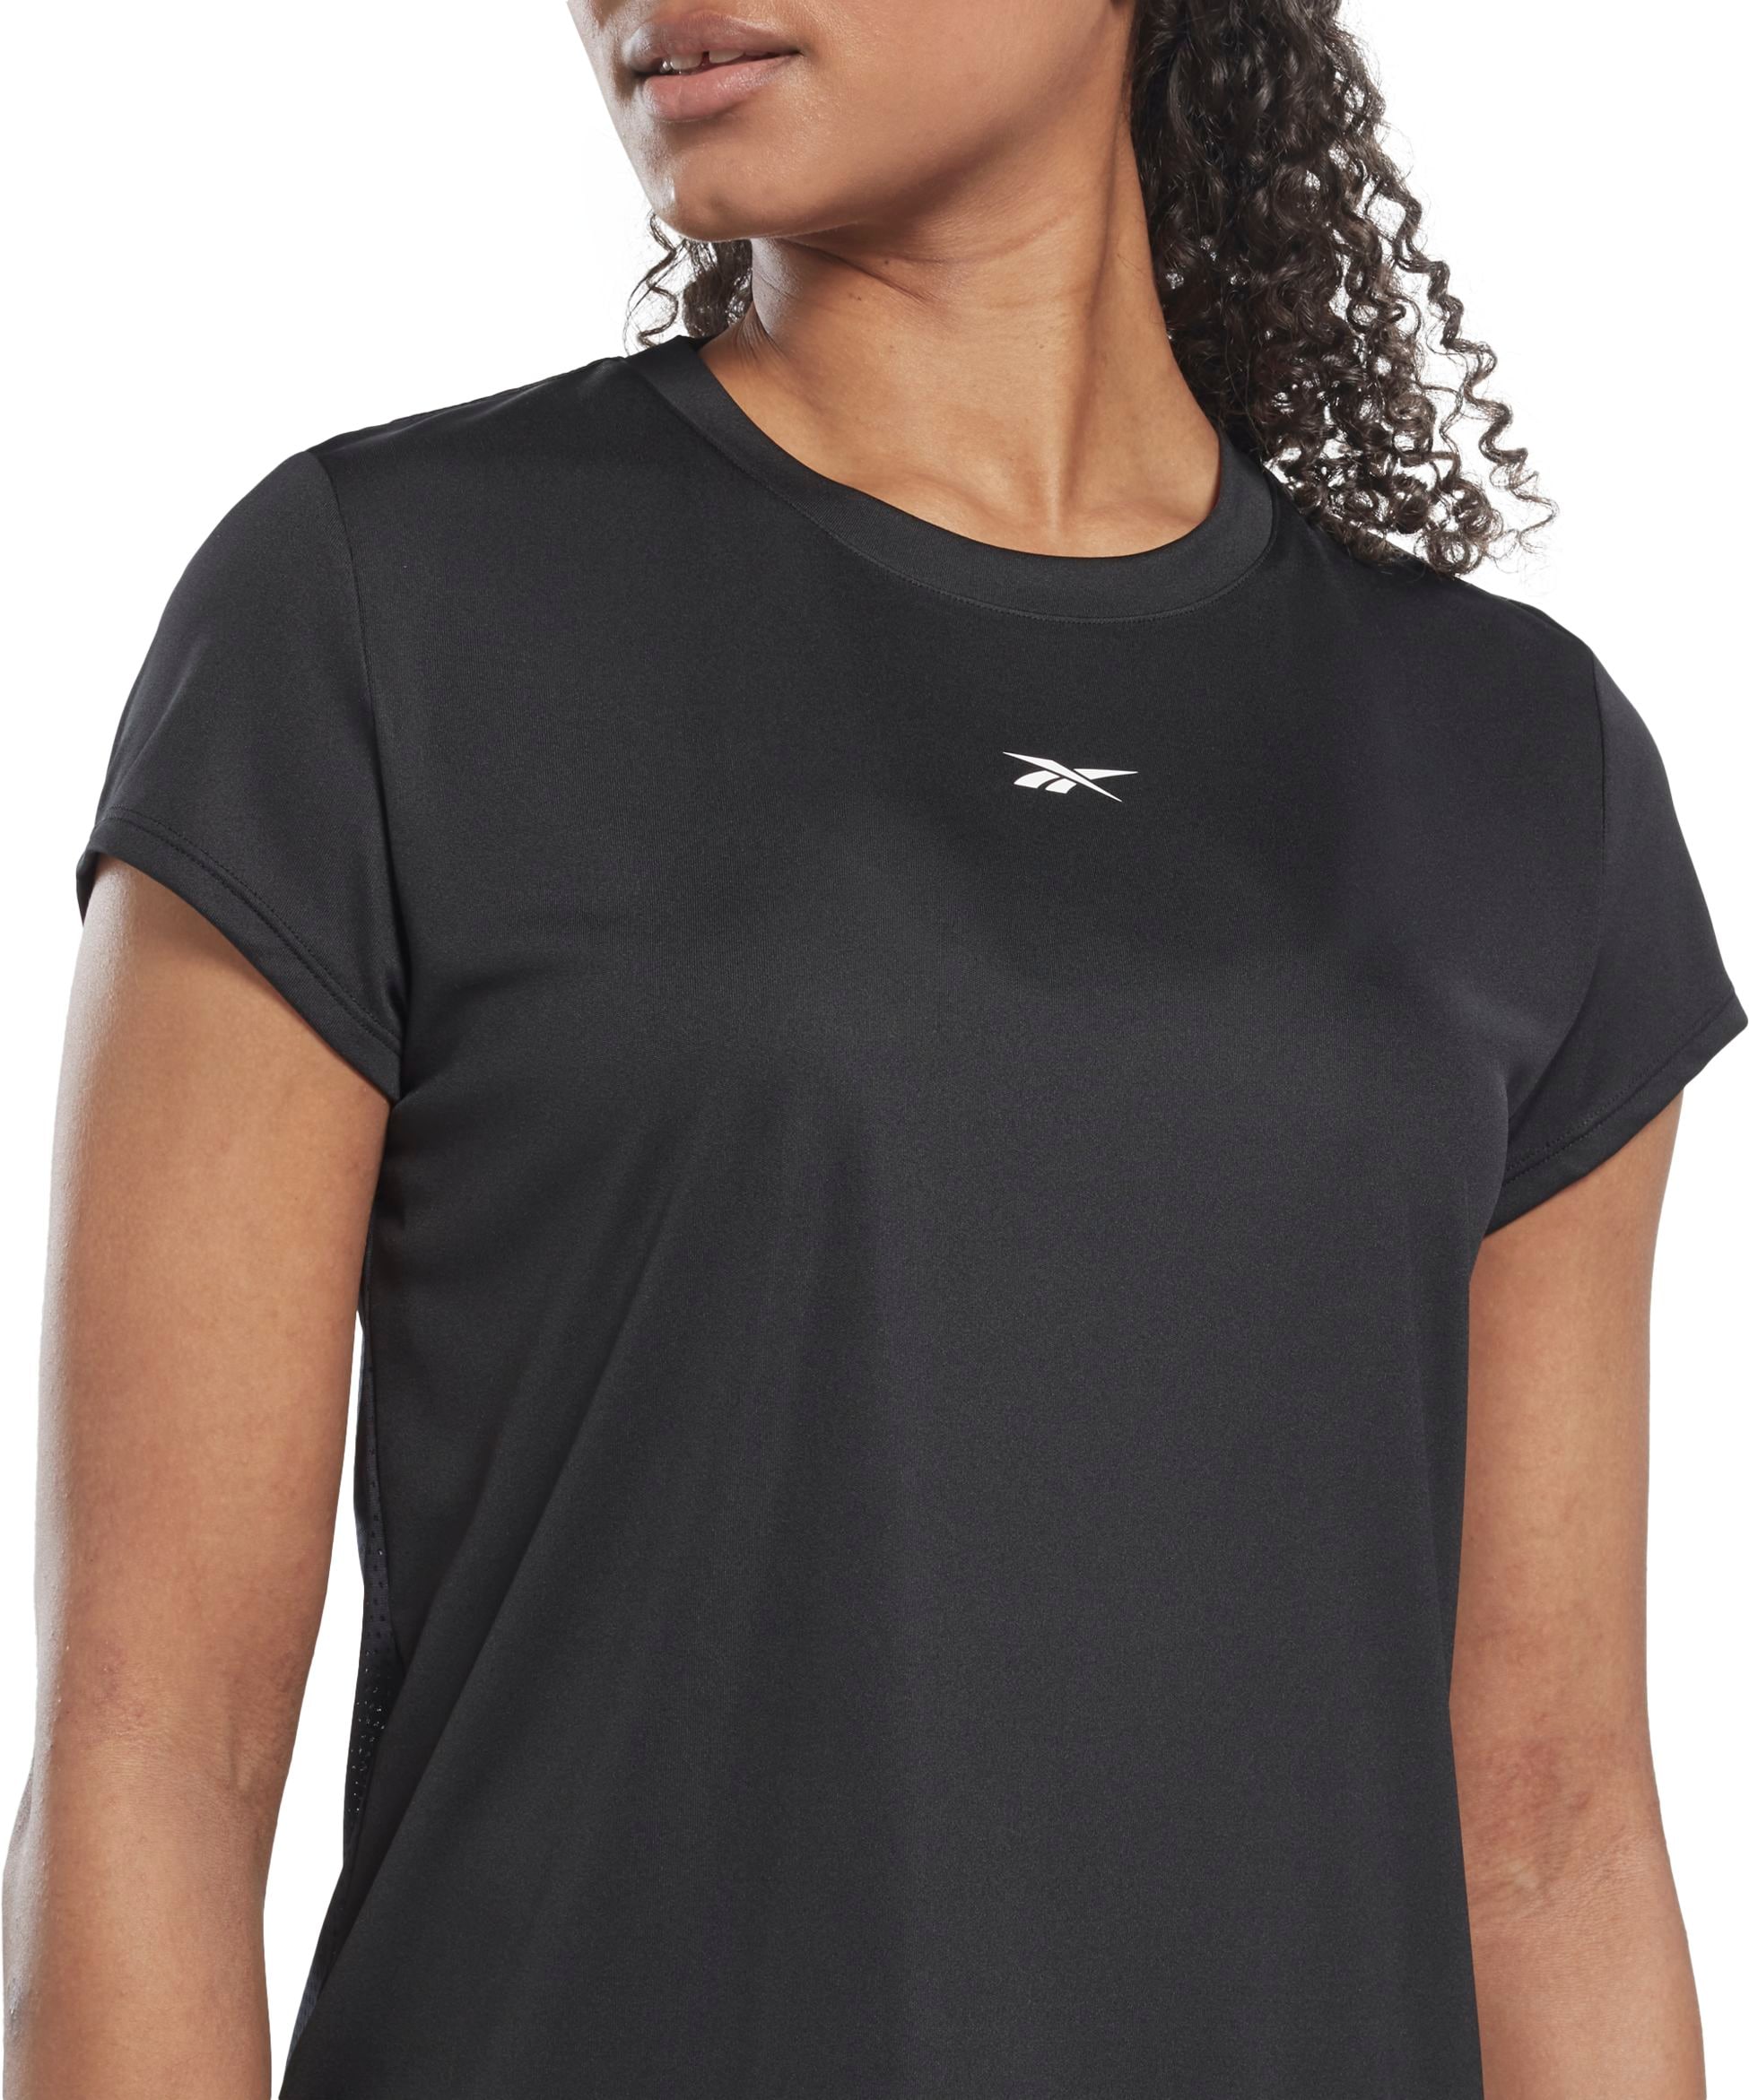 REEBOK, WOR COMMERCIAL POLLY TEE W